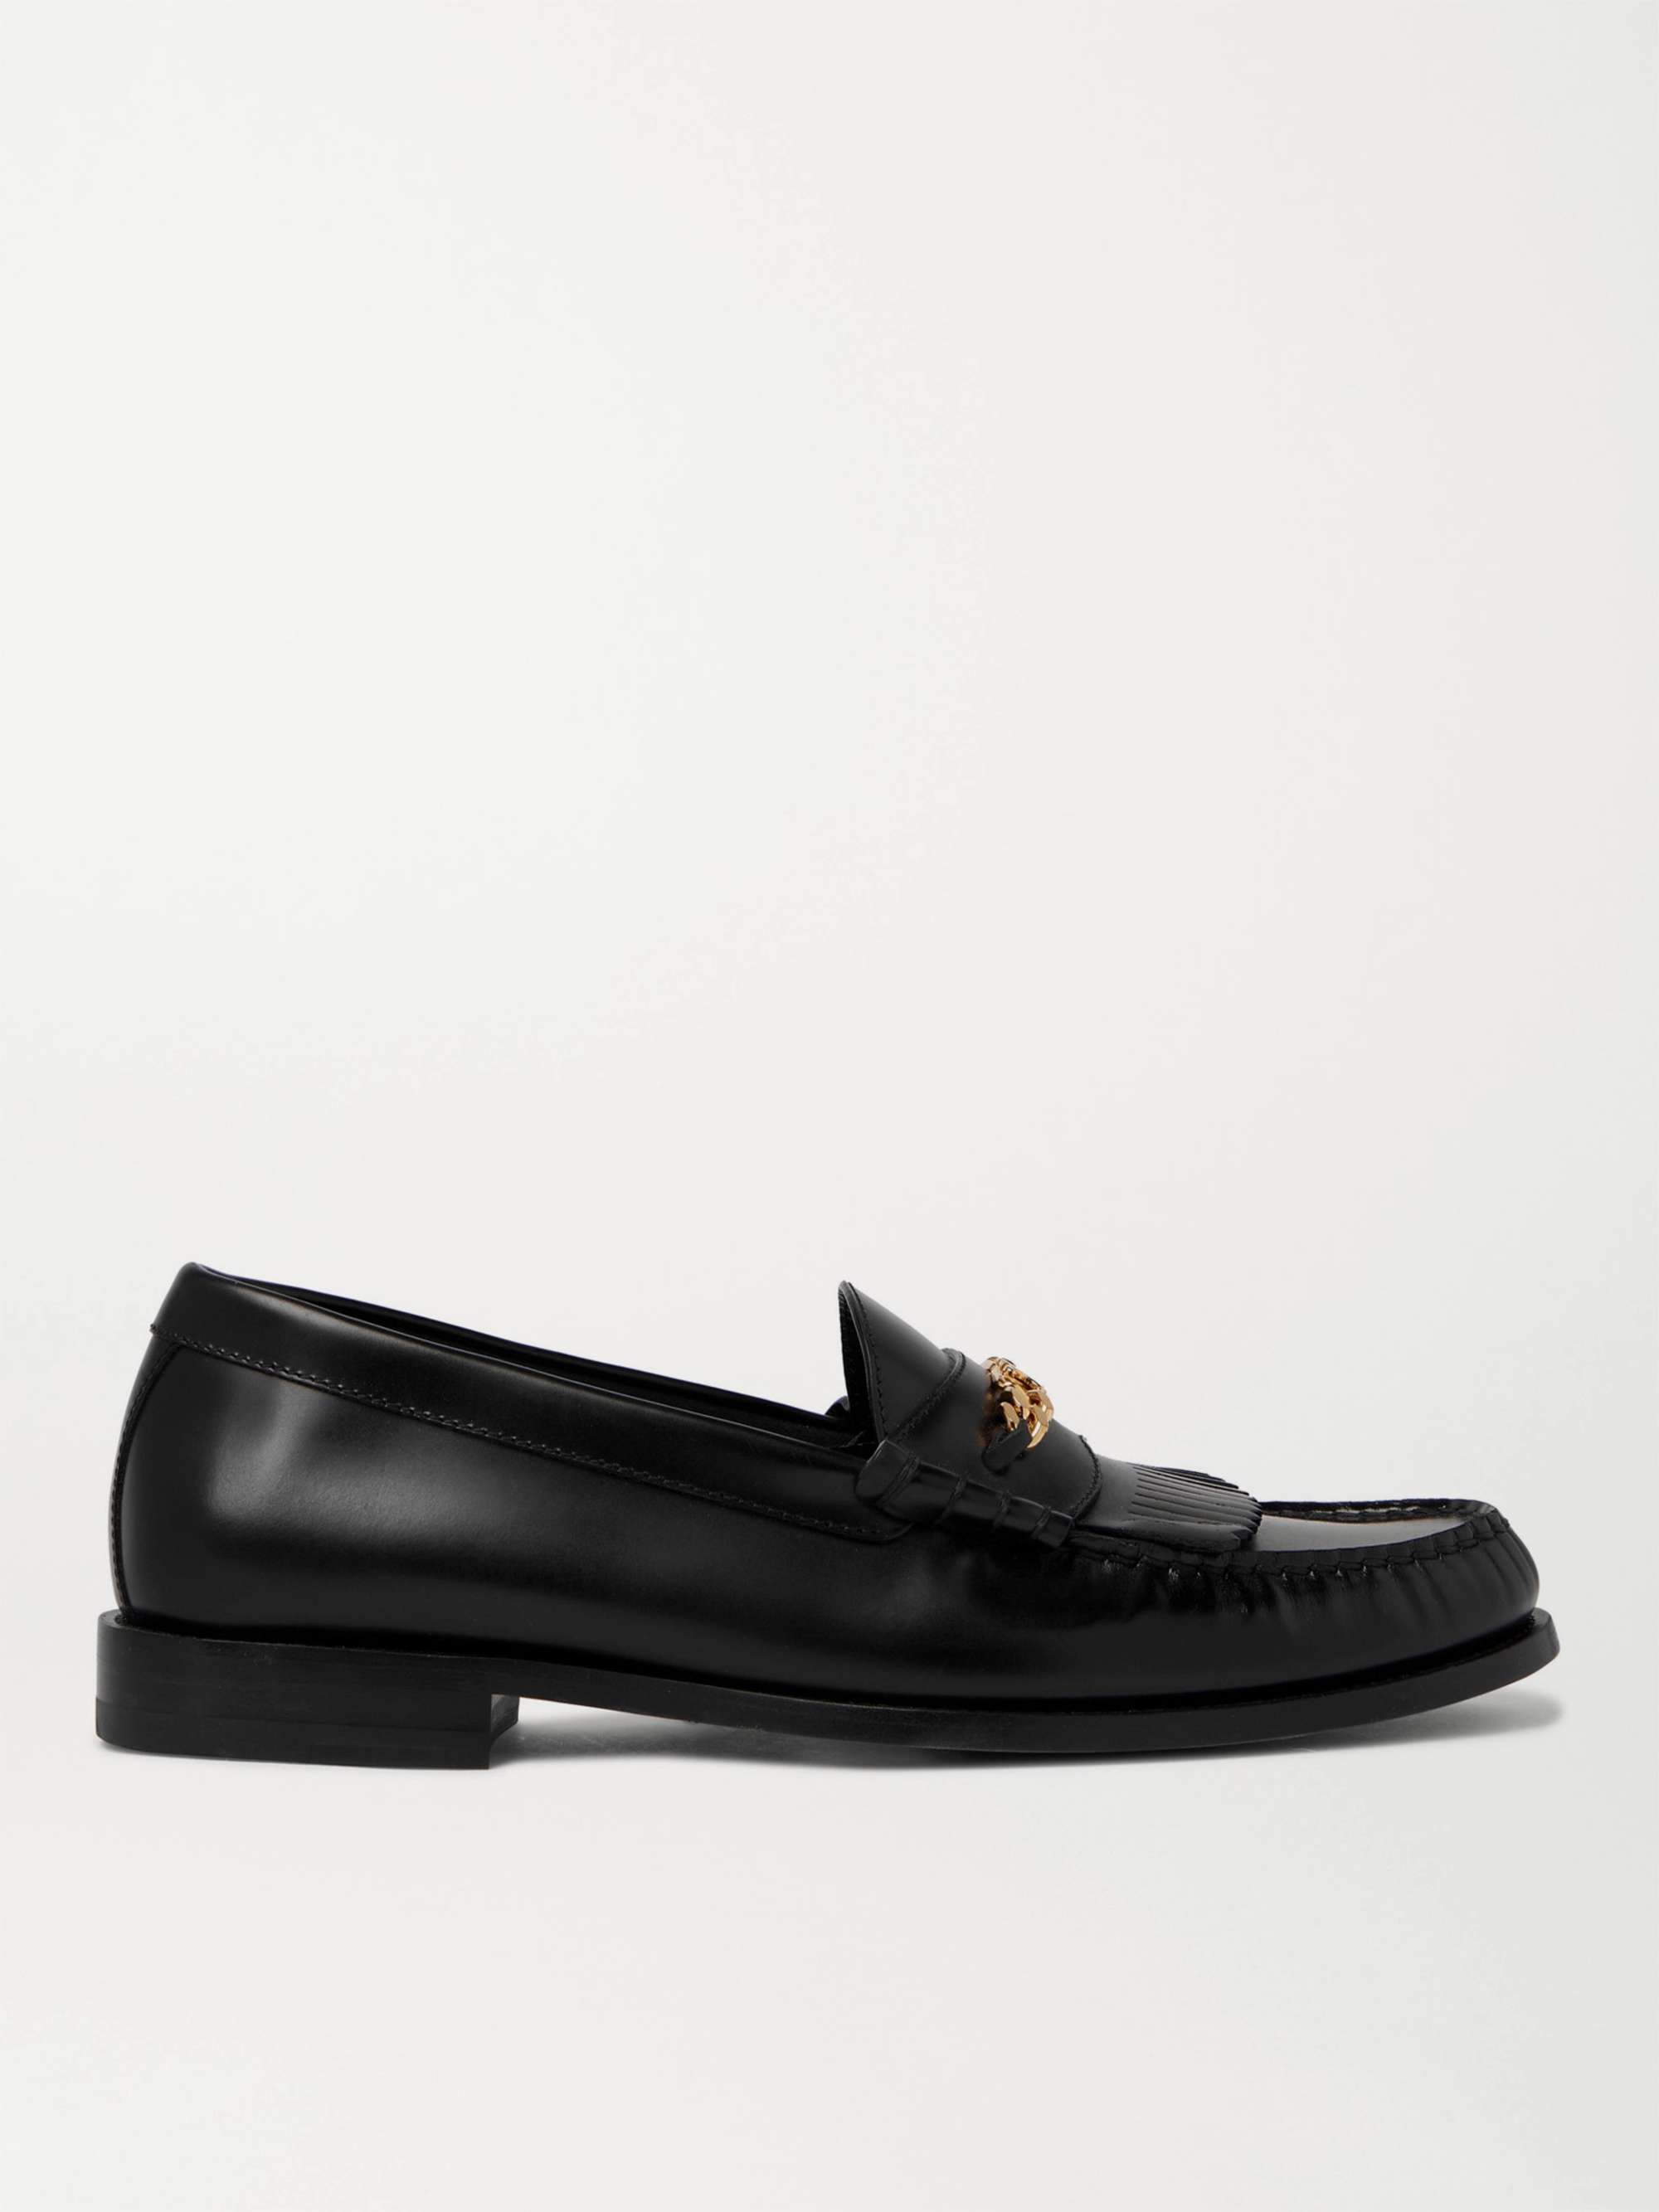 CELINE HOMME Leather Penny Loafers